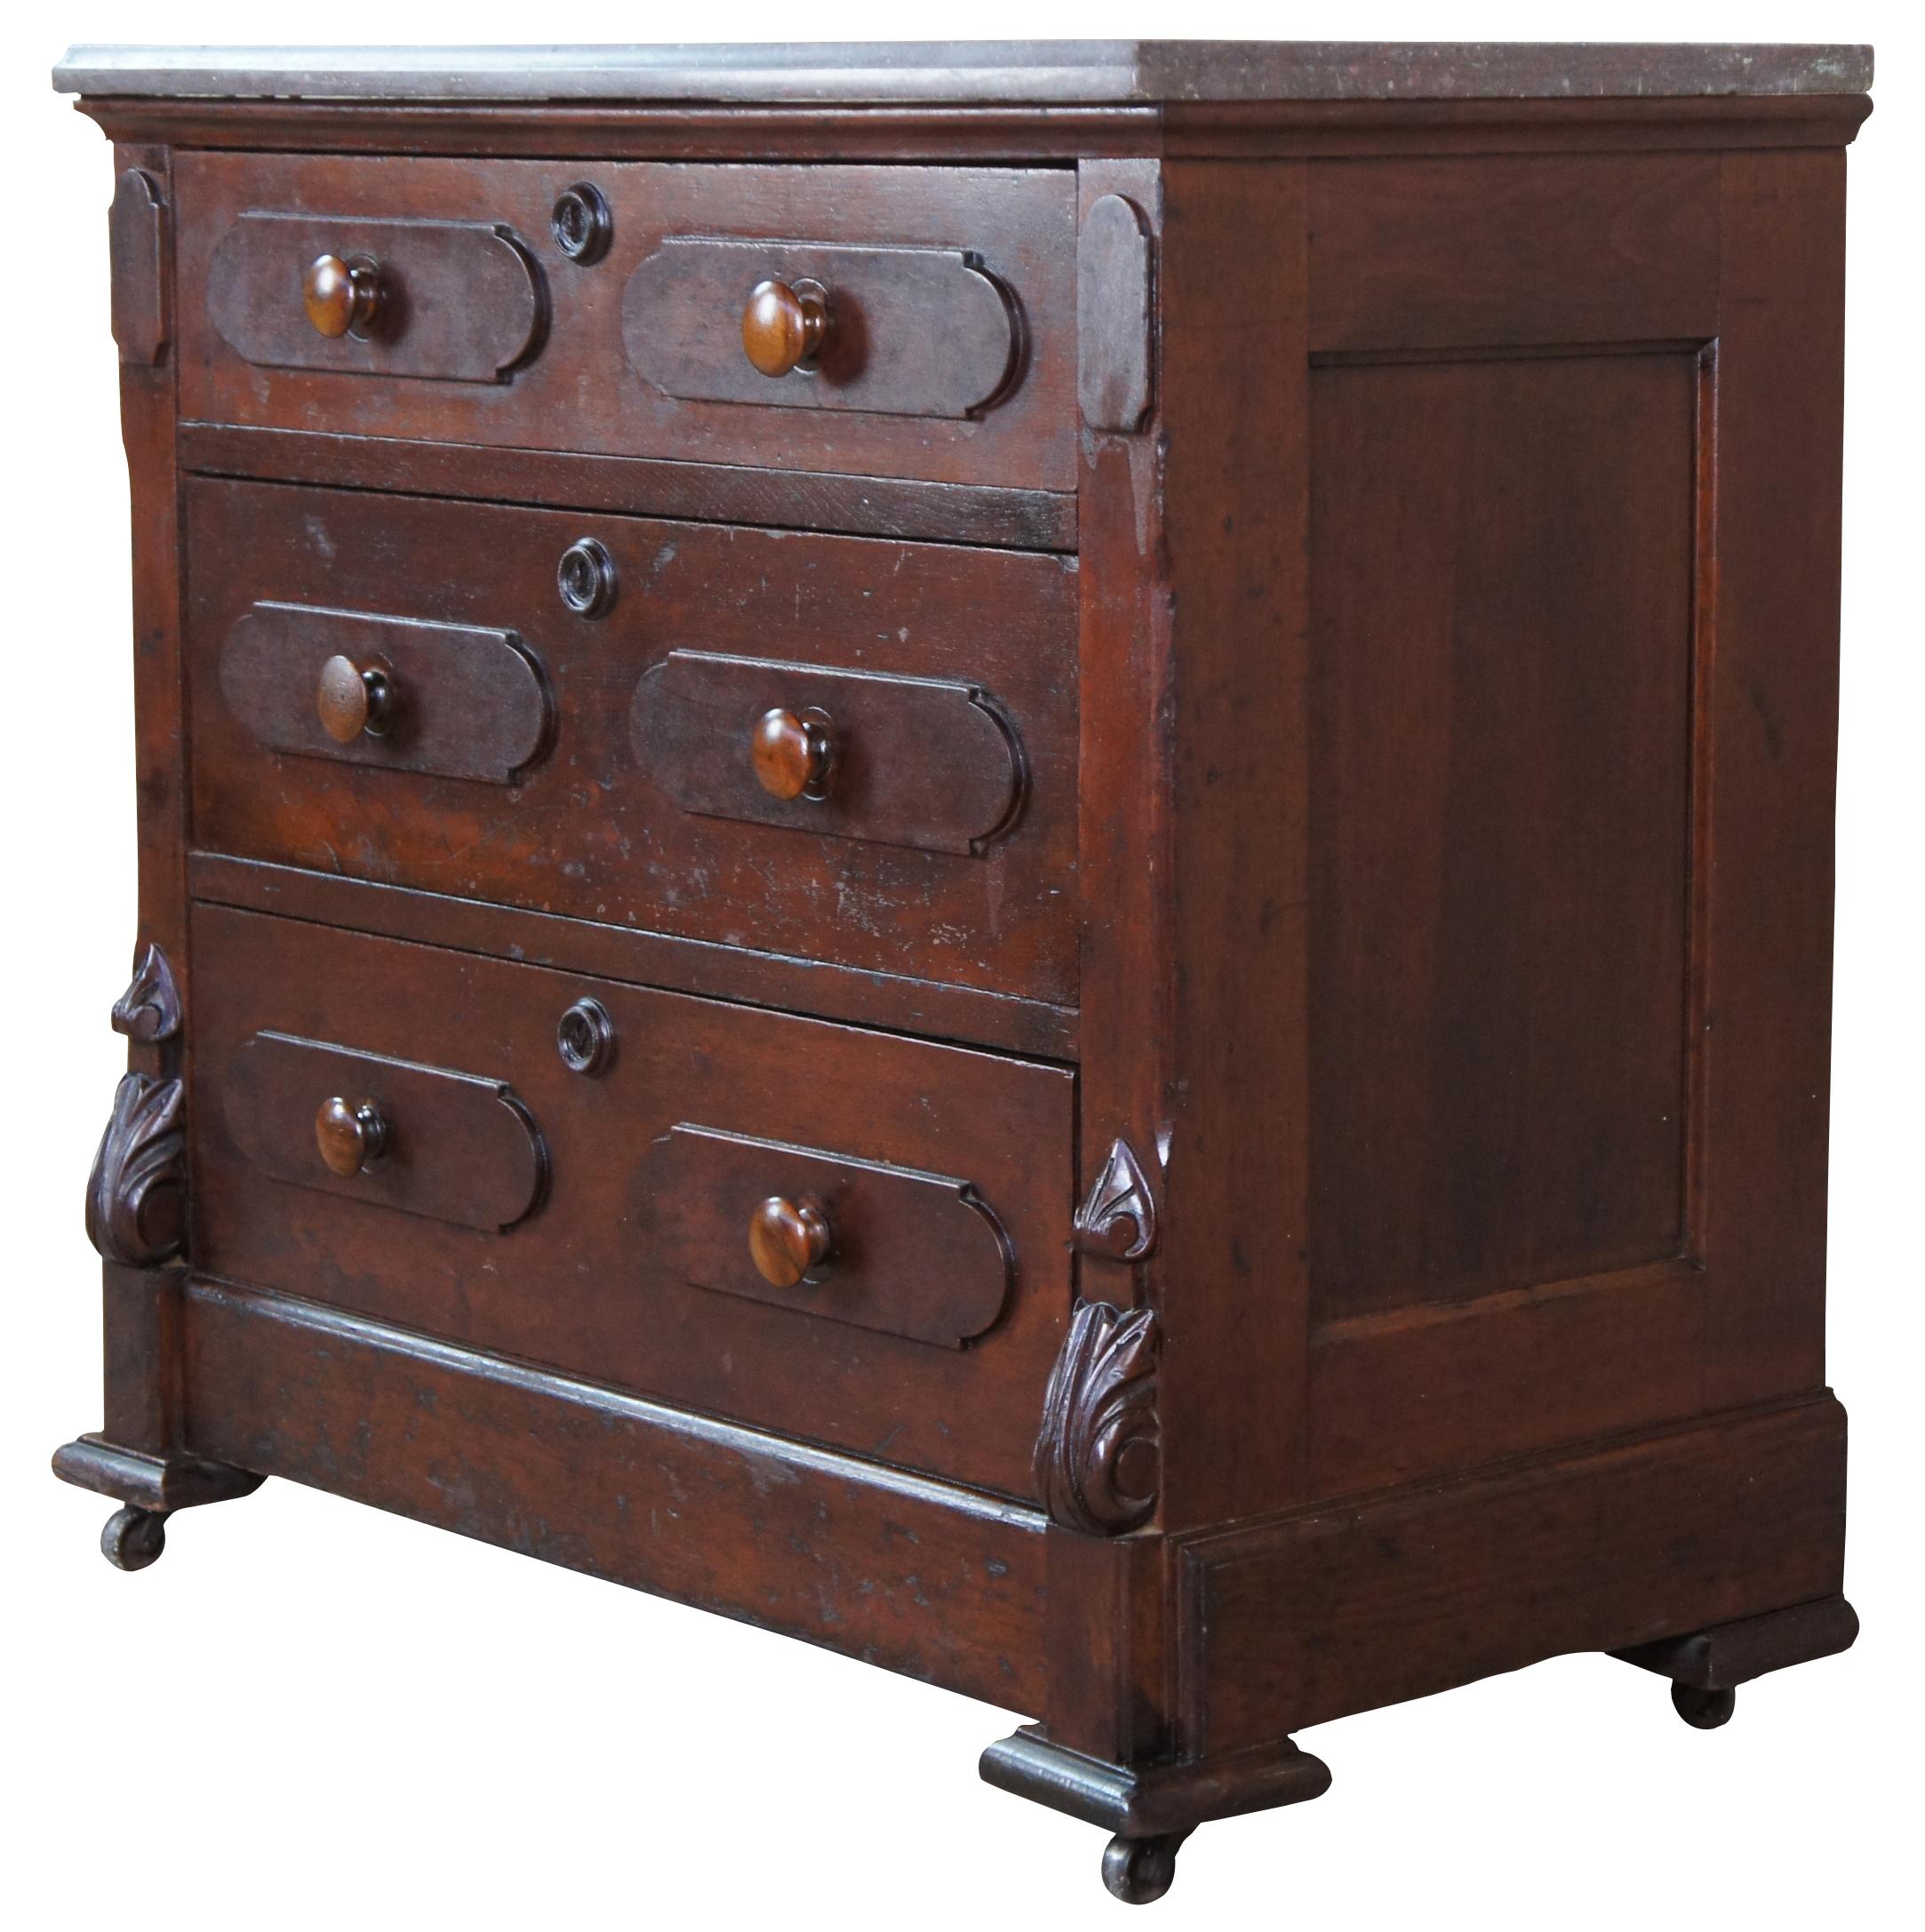 Antique Victorian Eastlake dresser or chest of drawers. Made of walnut featuring three (3) drawers with raised burled panels, turned knobs, acanthus carved accents, and granite top over square feet with castors.
  